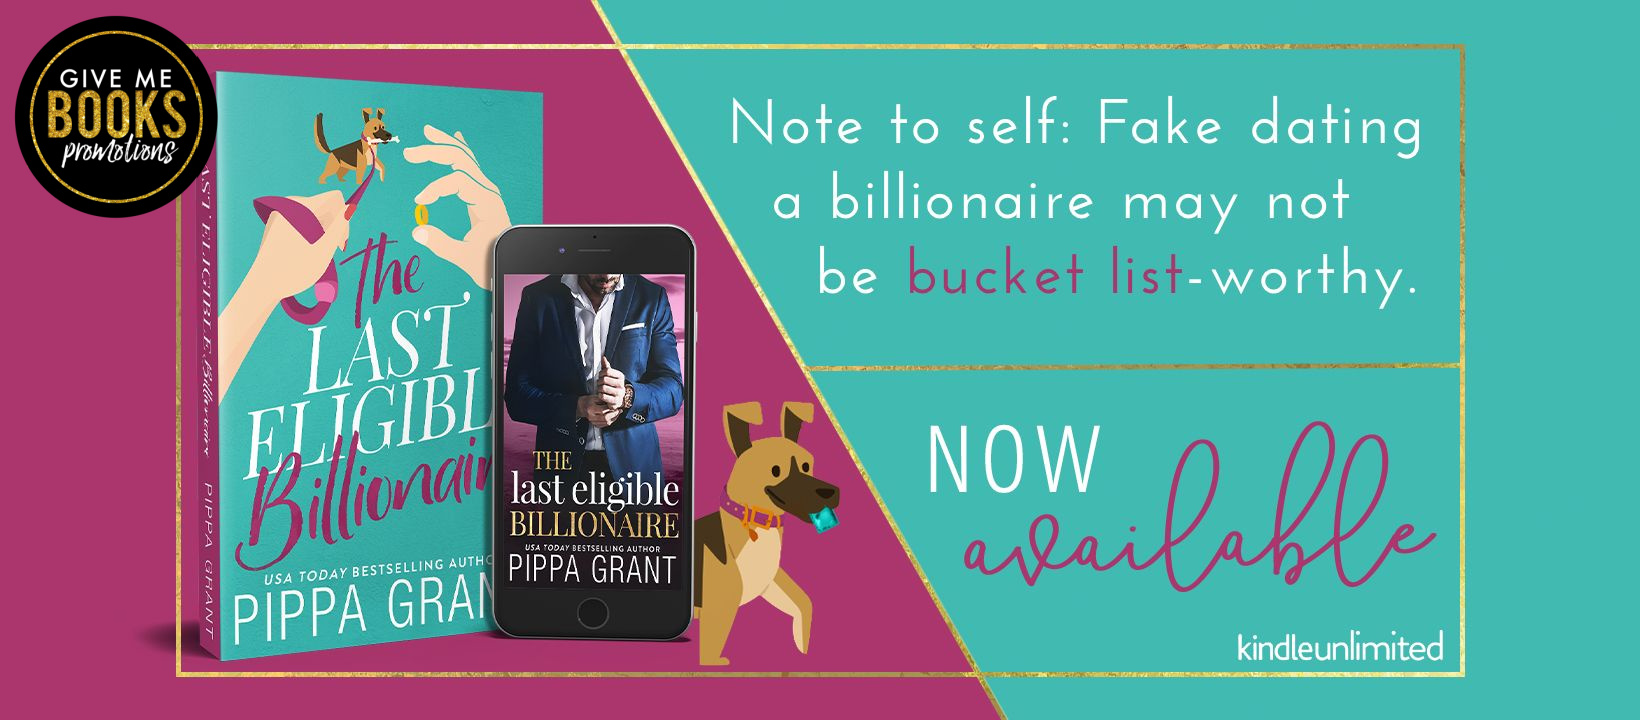 Release Boost: The Last Eligible Billionaire by Pippa Grant